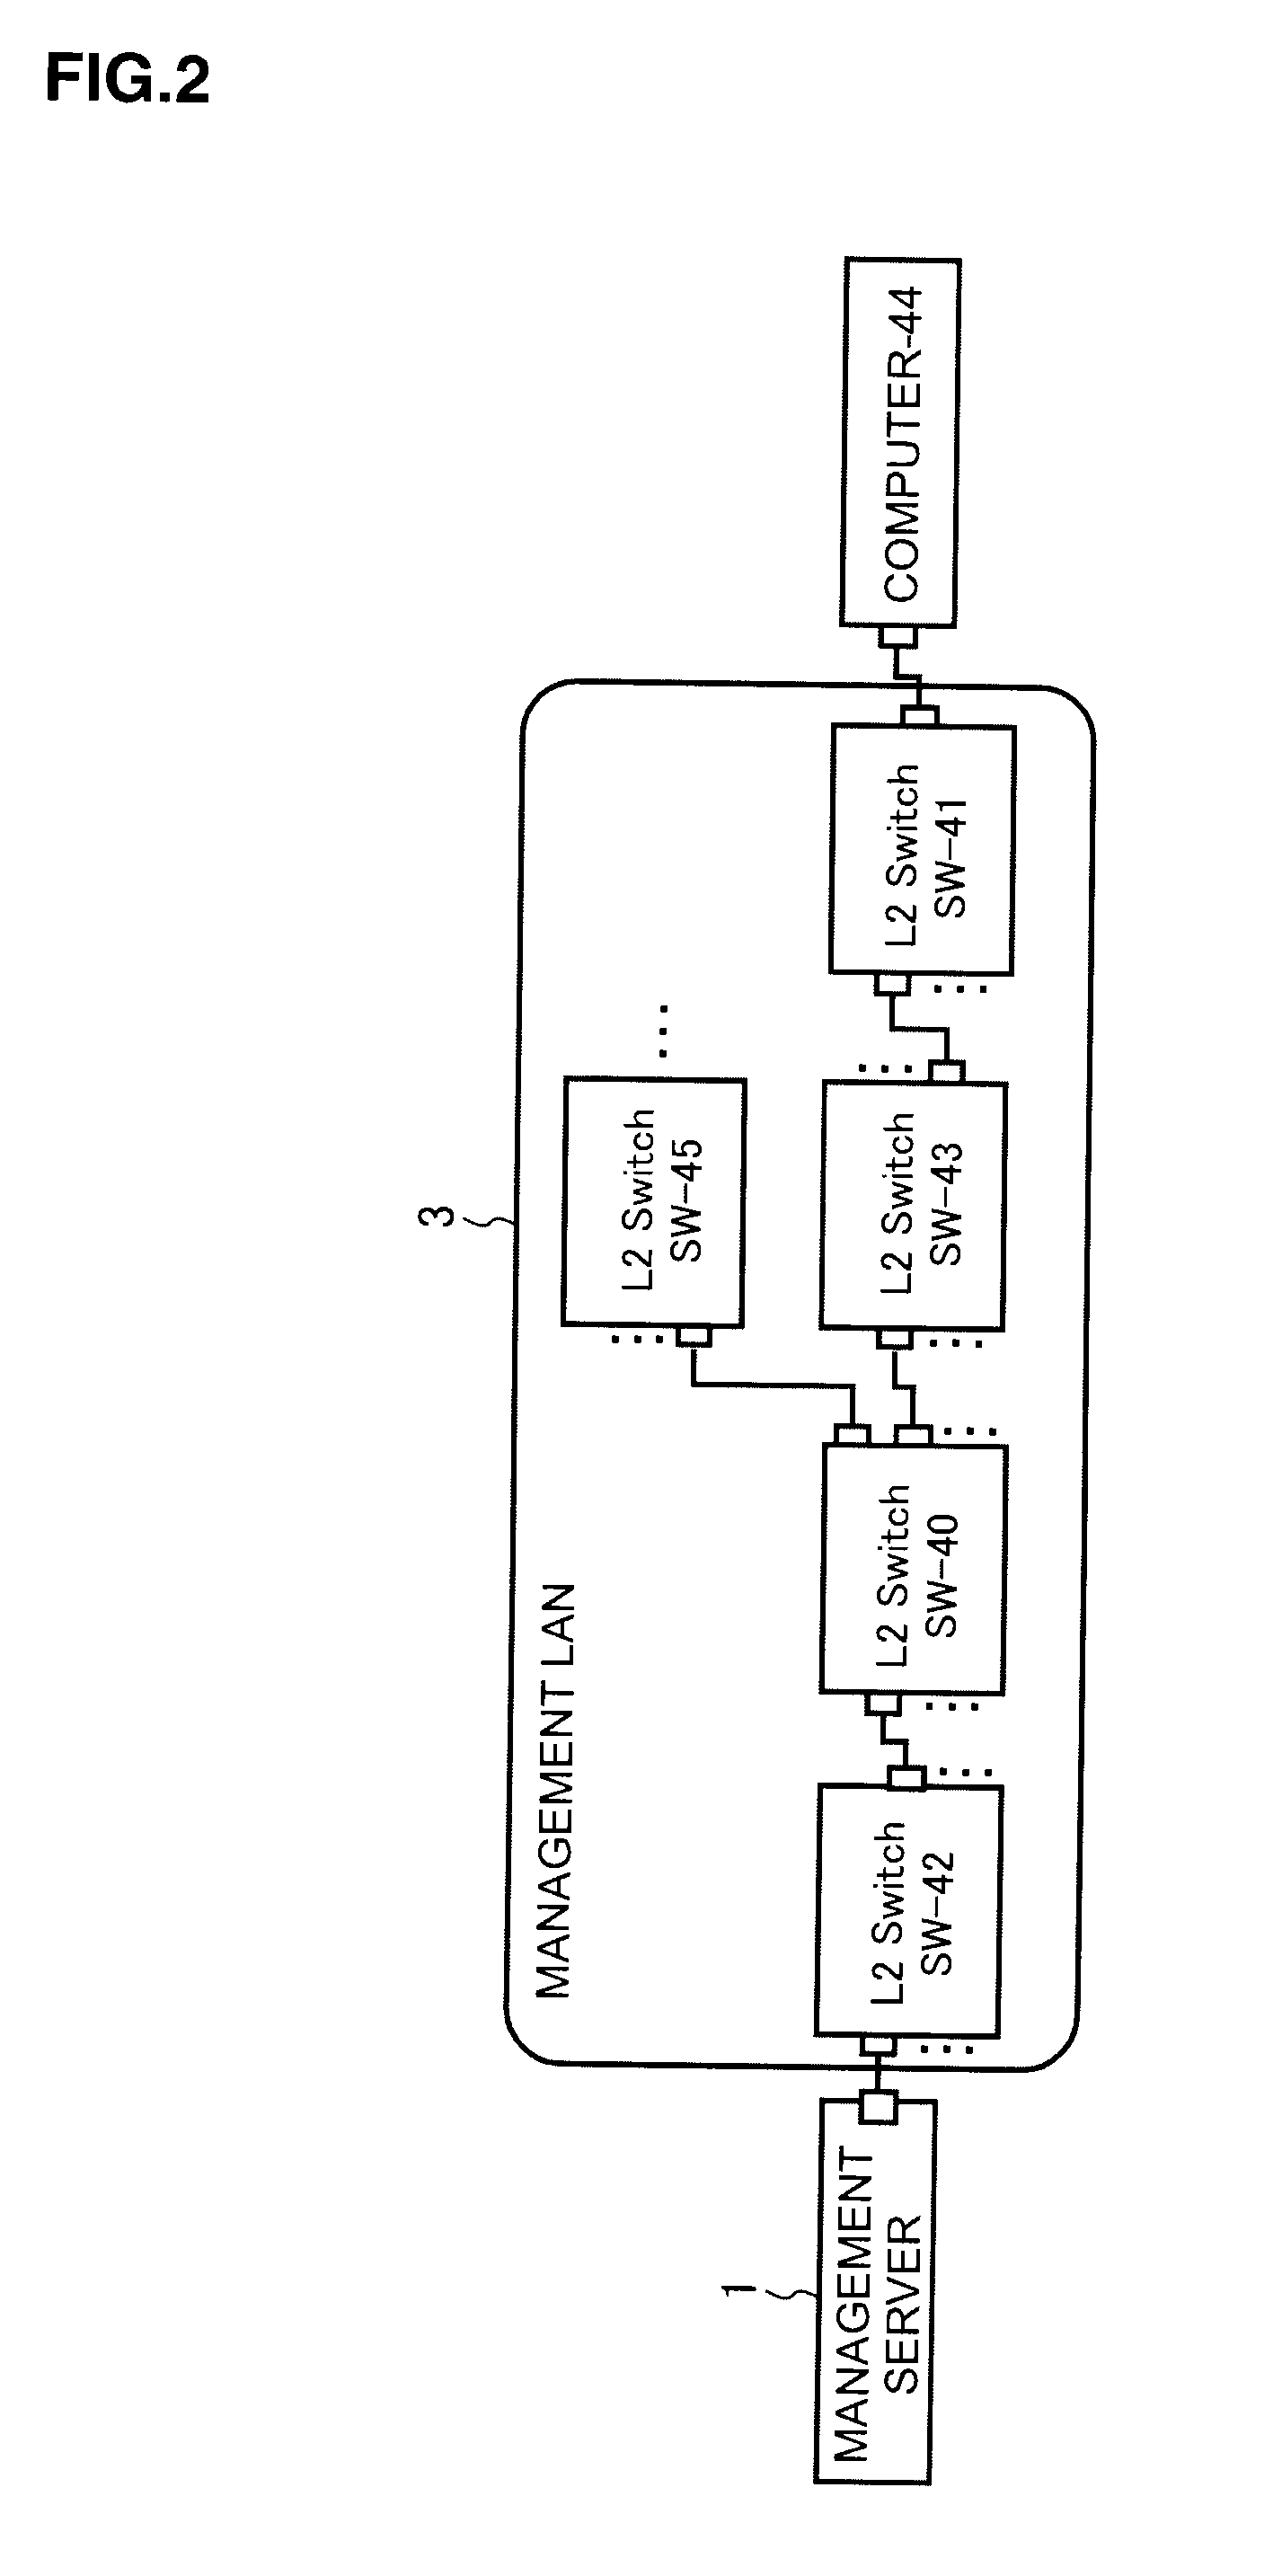 Management system and information processing system